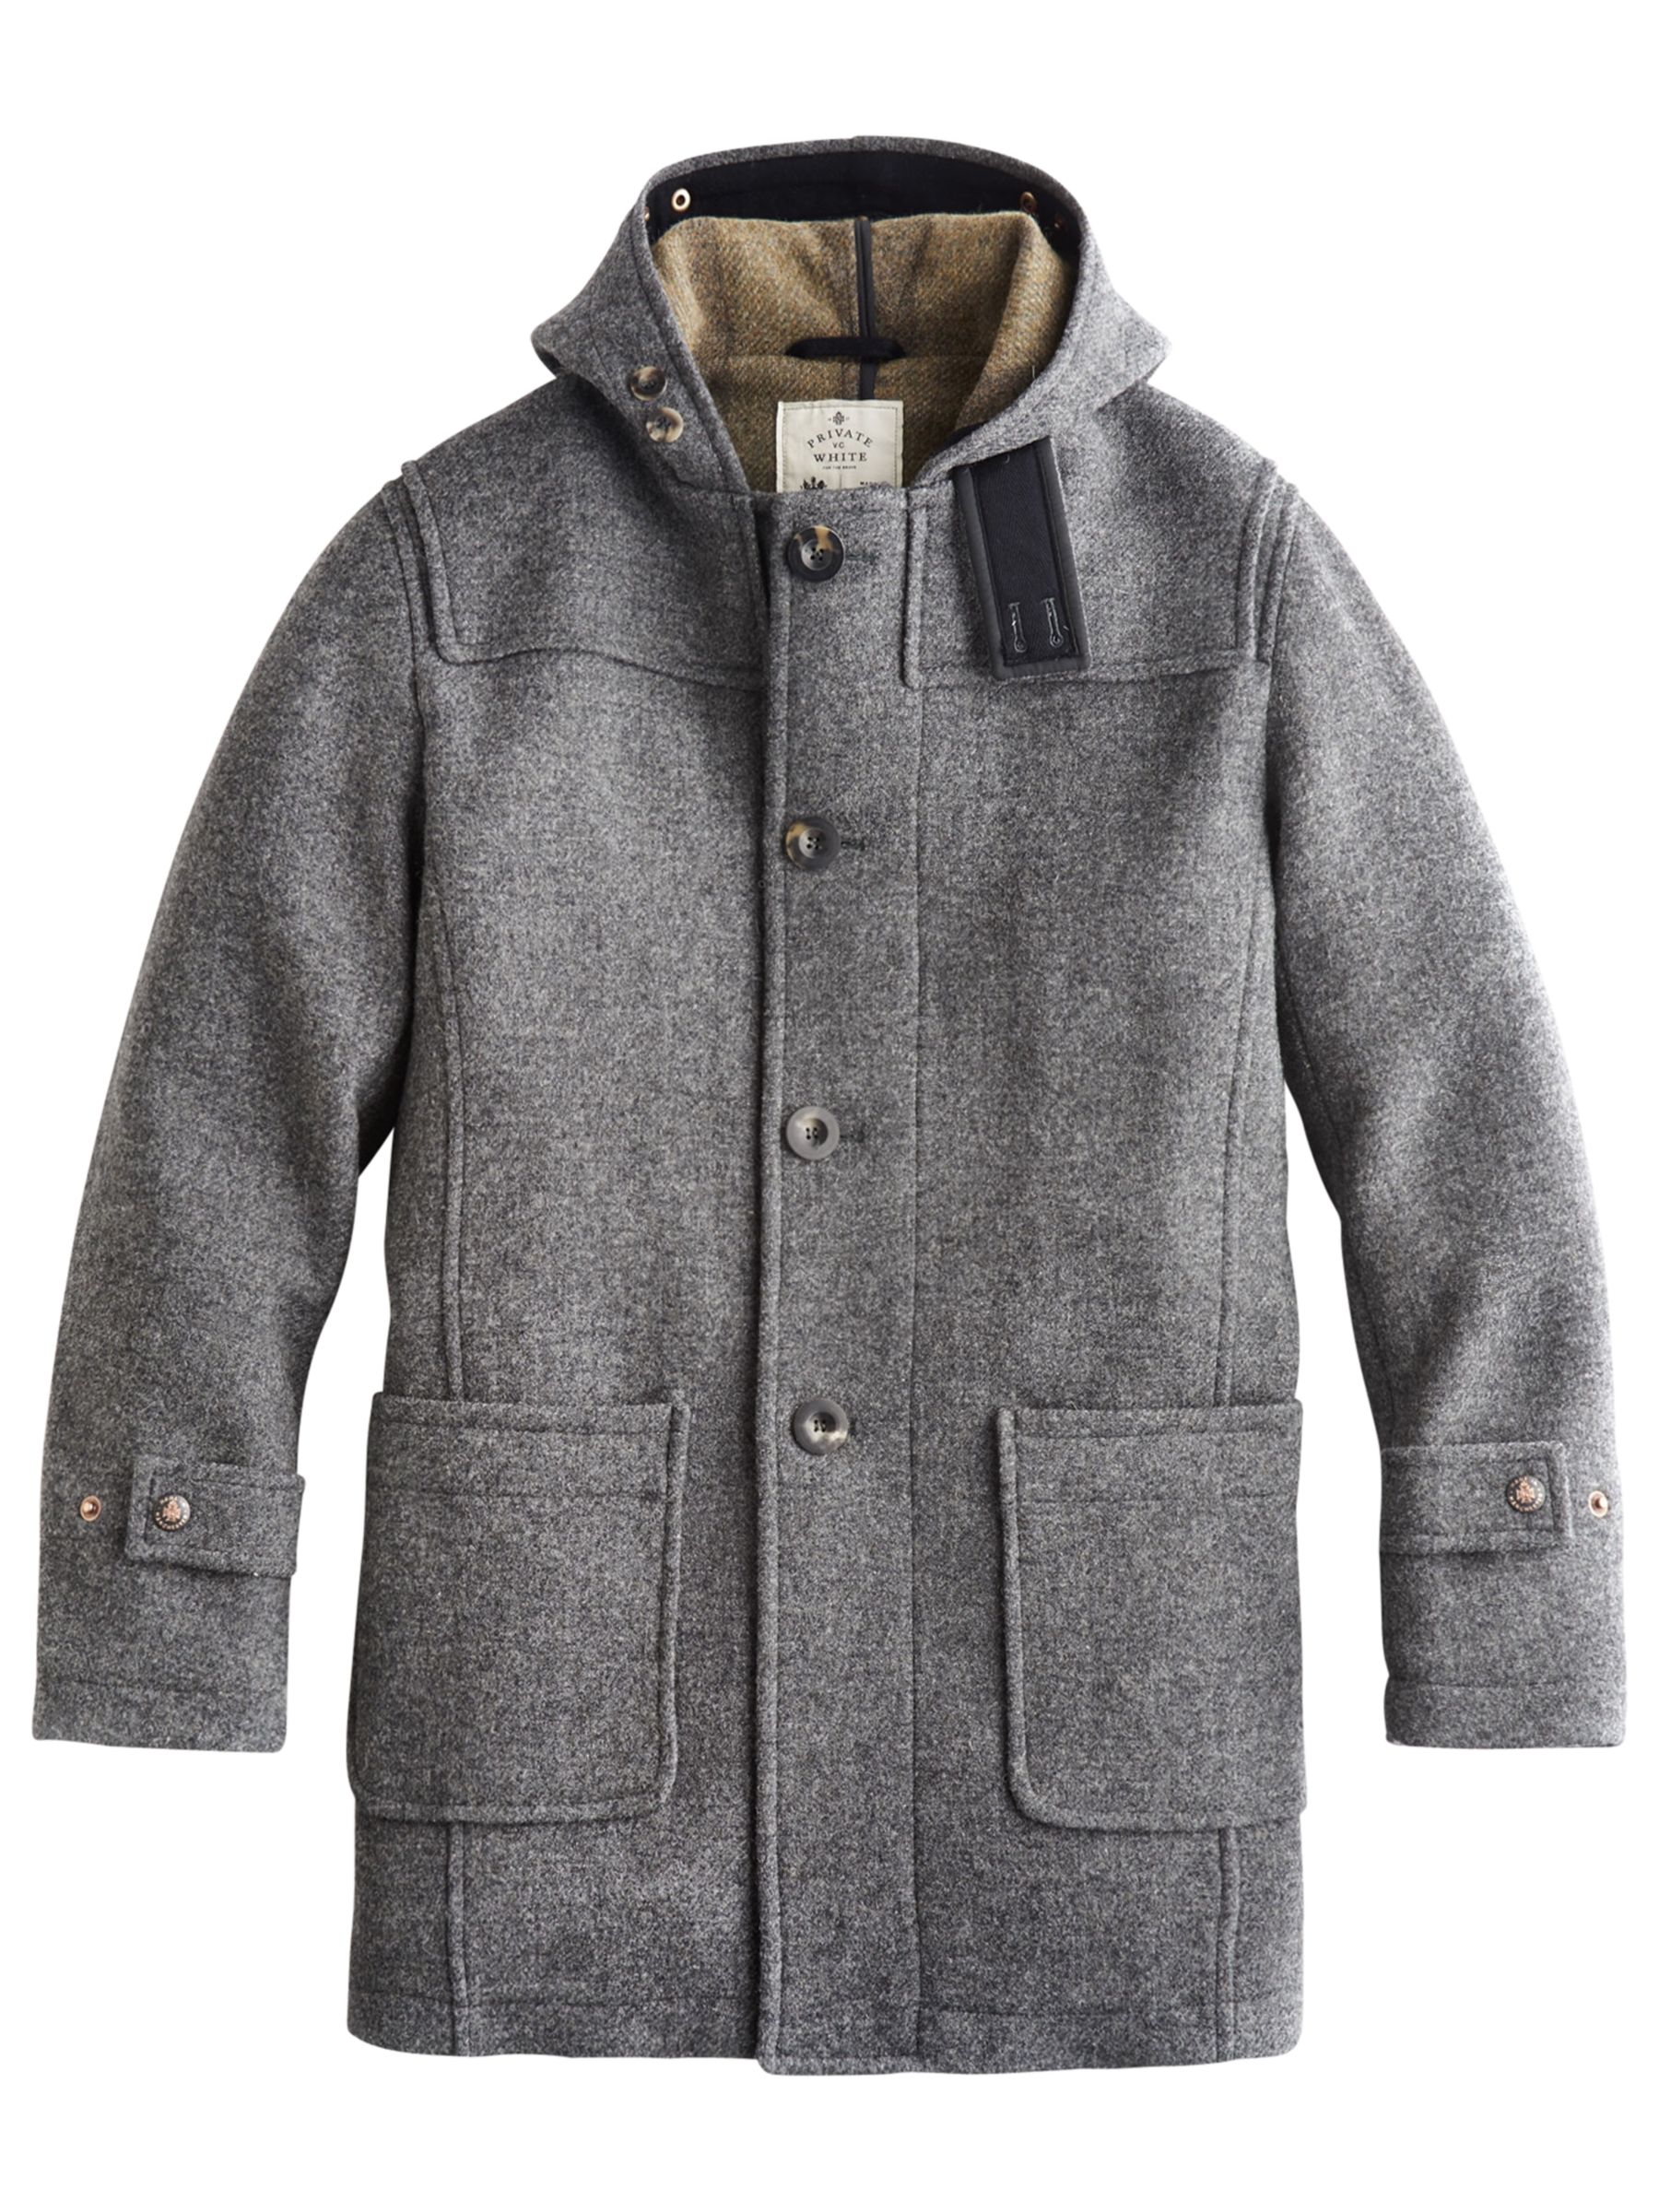 Buy Private White V.C. Duffle Coat, Grey Online at johnlewis.com